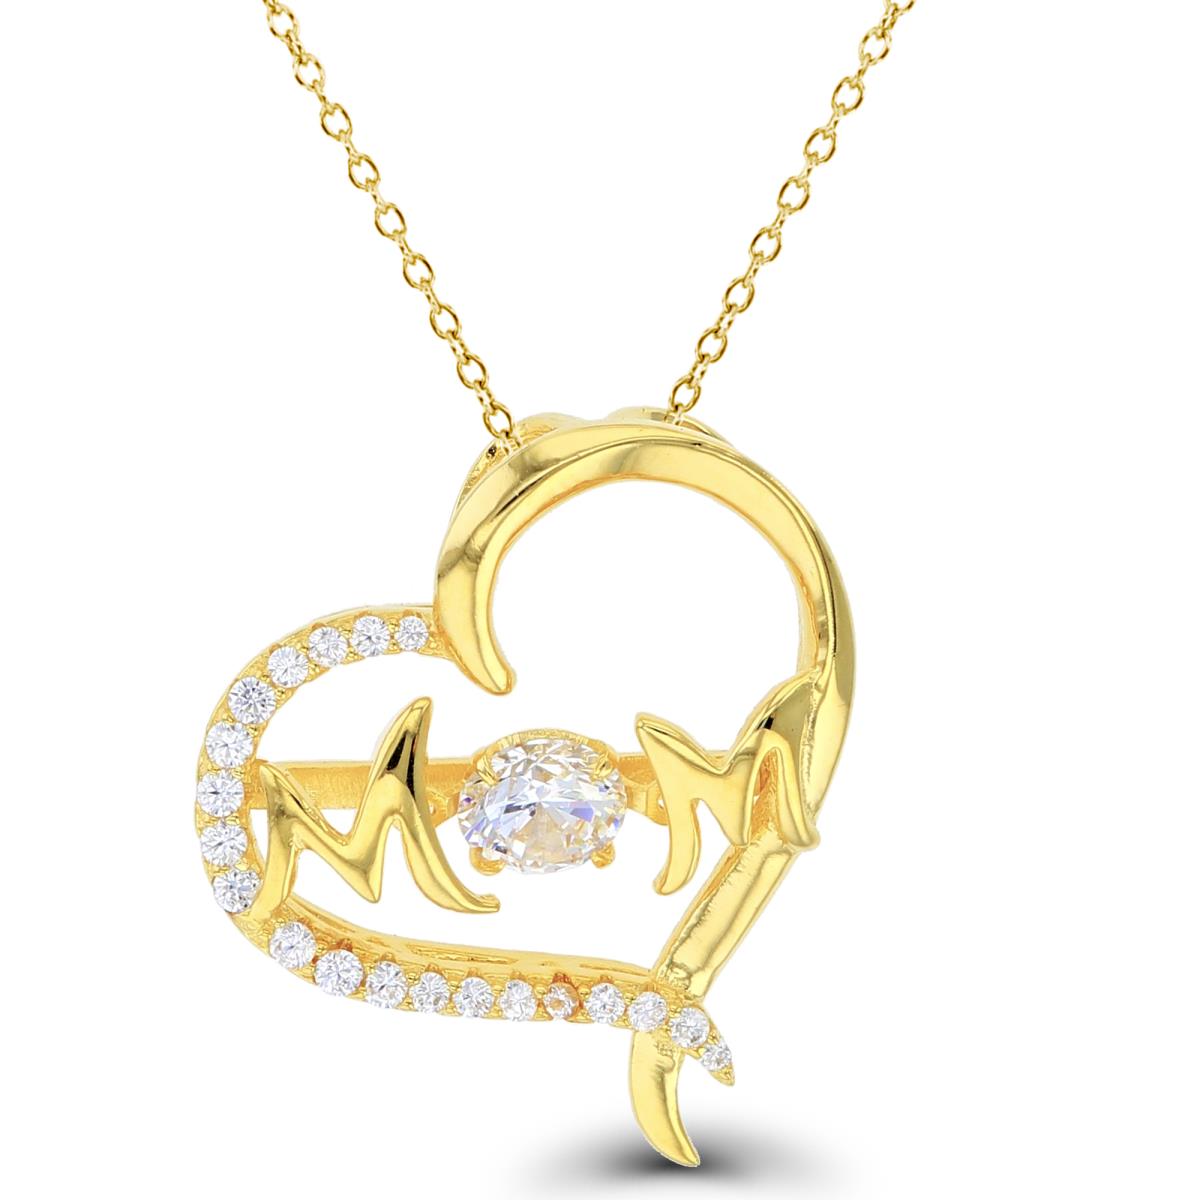 Sterling Silver+1Micron Yellow Gold 5mm Rnd White CZ Dancing in "MOM" Open Heart 18"Necklace